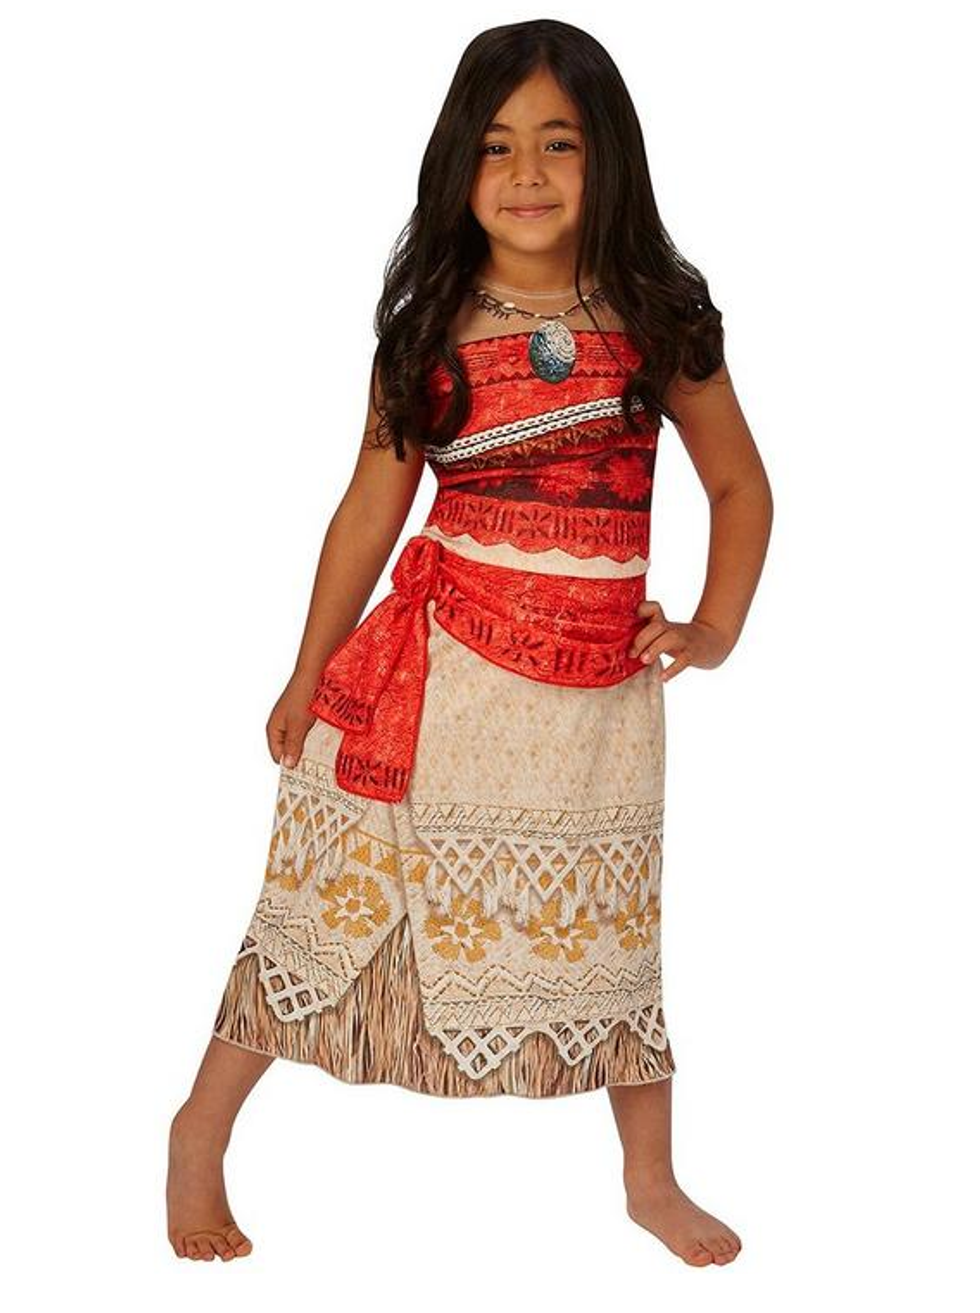 Parents Are Being Warned Not To Dress Their Kids Up As Moana This Halloween 22 Words